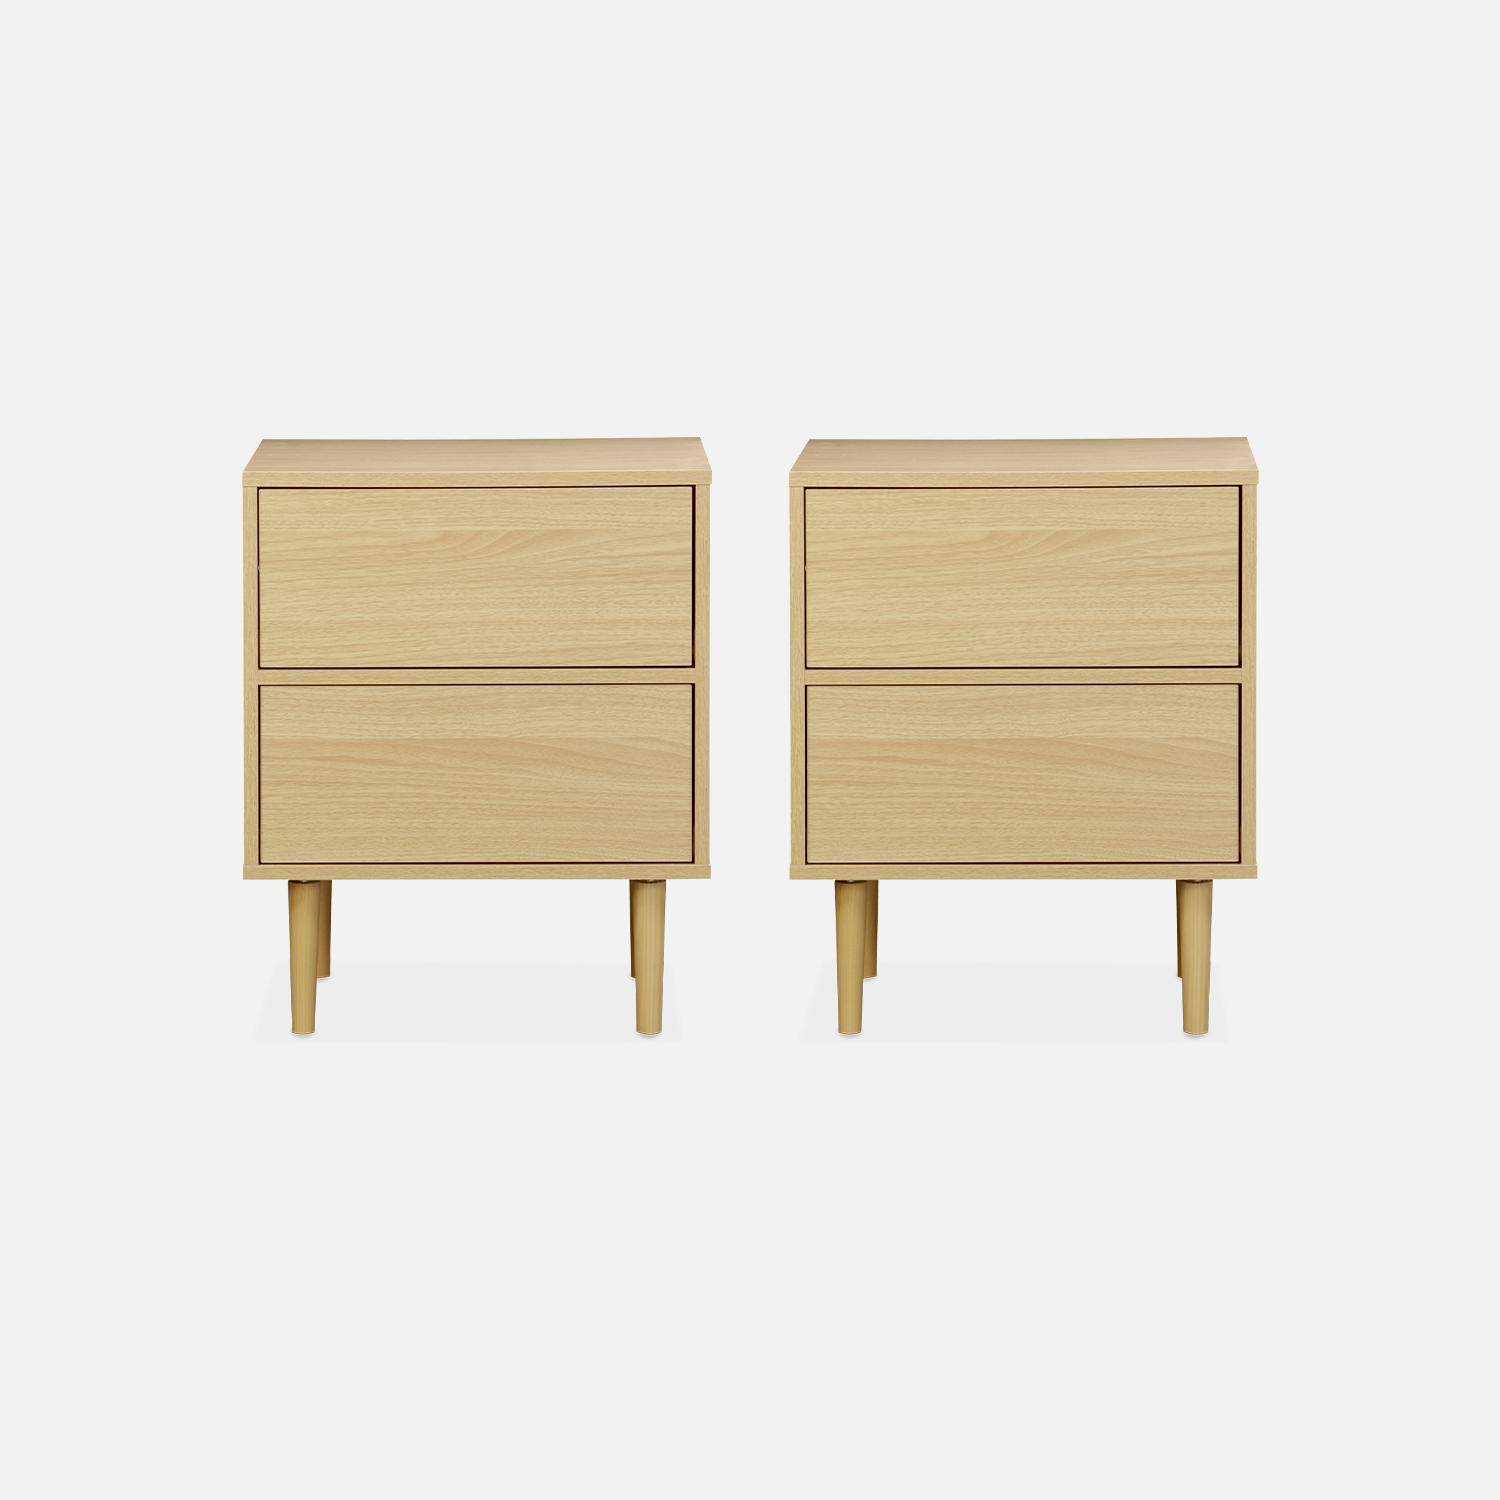 Pair of wood-effect bedside tables with two drawers, 48x40x59cm - Mika - Natural Wood Photo4